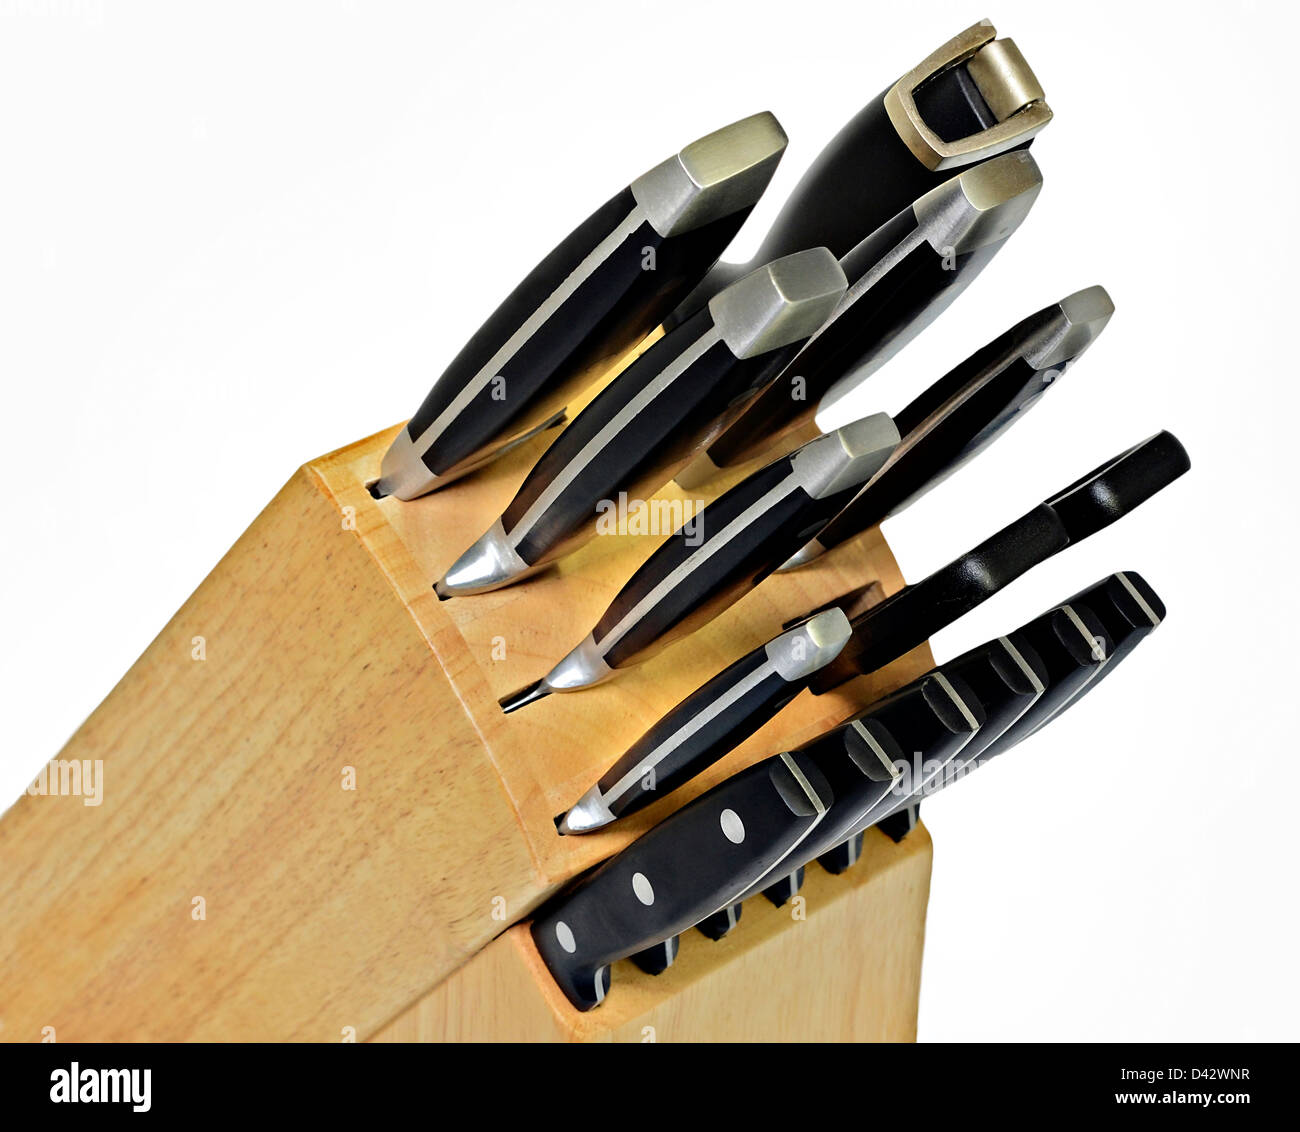 A set of kitchen knives in a wooden block. Stock Photo